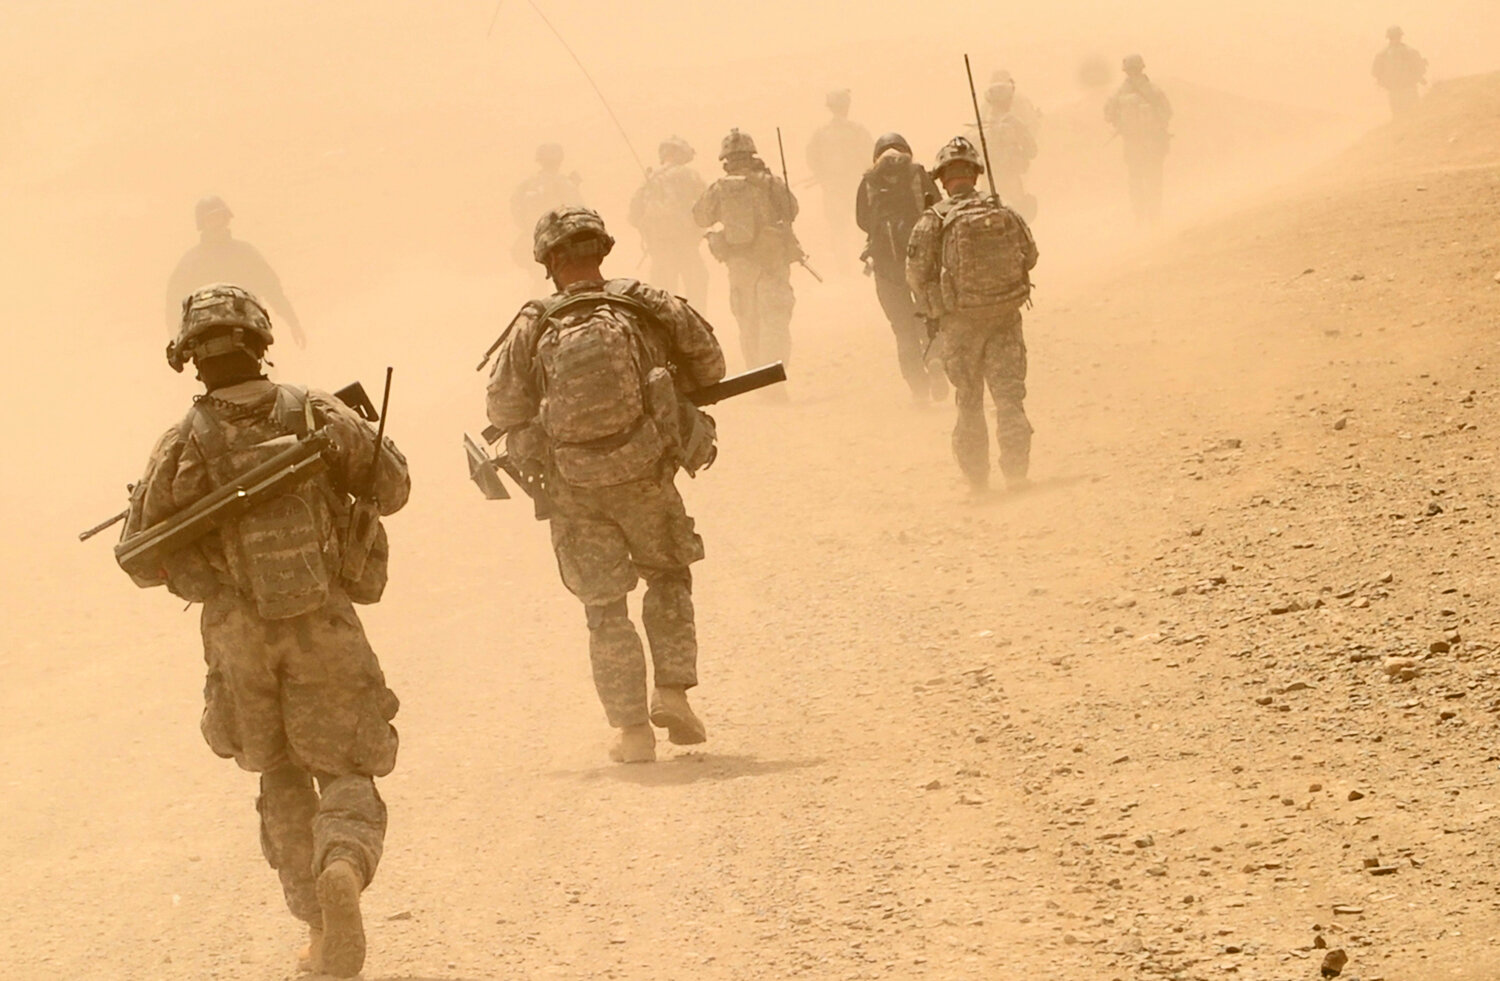  US Army soldiers from 1st Platoon Alpha Company 3-187 3BCT 101 Airborne walk during an early morning patrolling in Yosef Khel district of Paktika province on April 3, 2010.  AFP PHOTO/MASSOUD Hossaini 